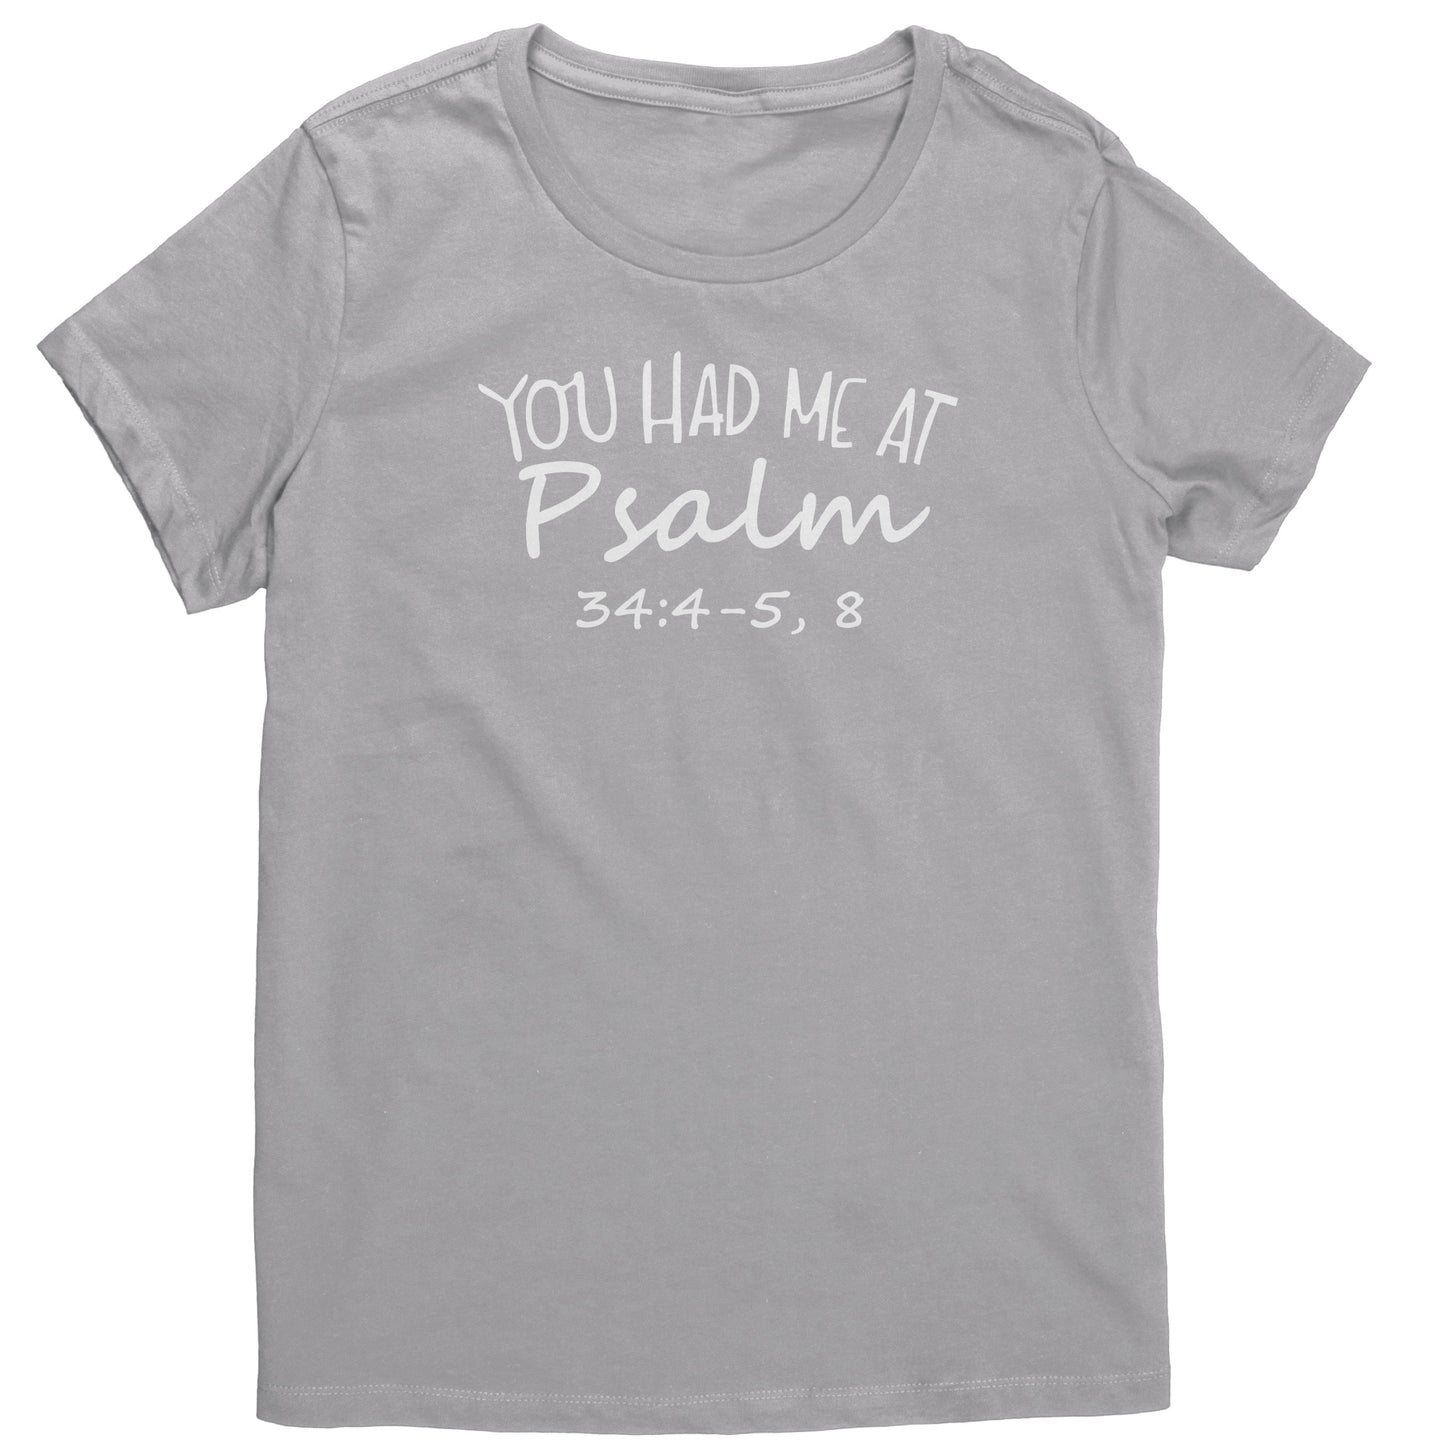 You Had Me At Psalm 34:4-5, 8 Women's T-Shirt Part 2